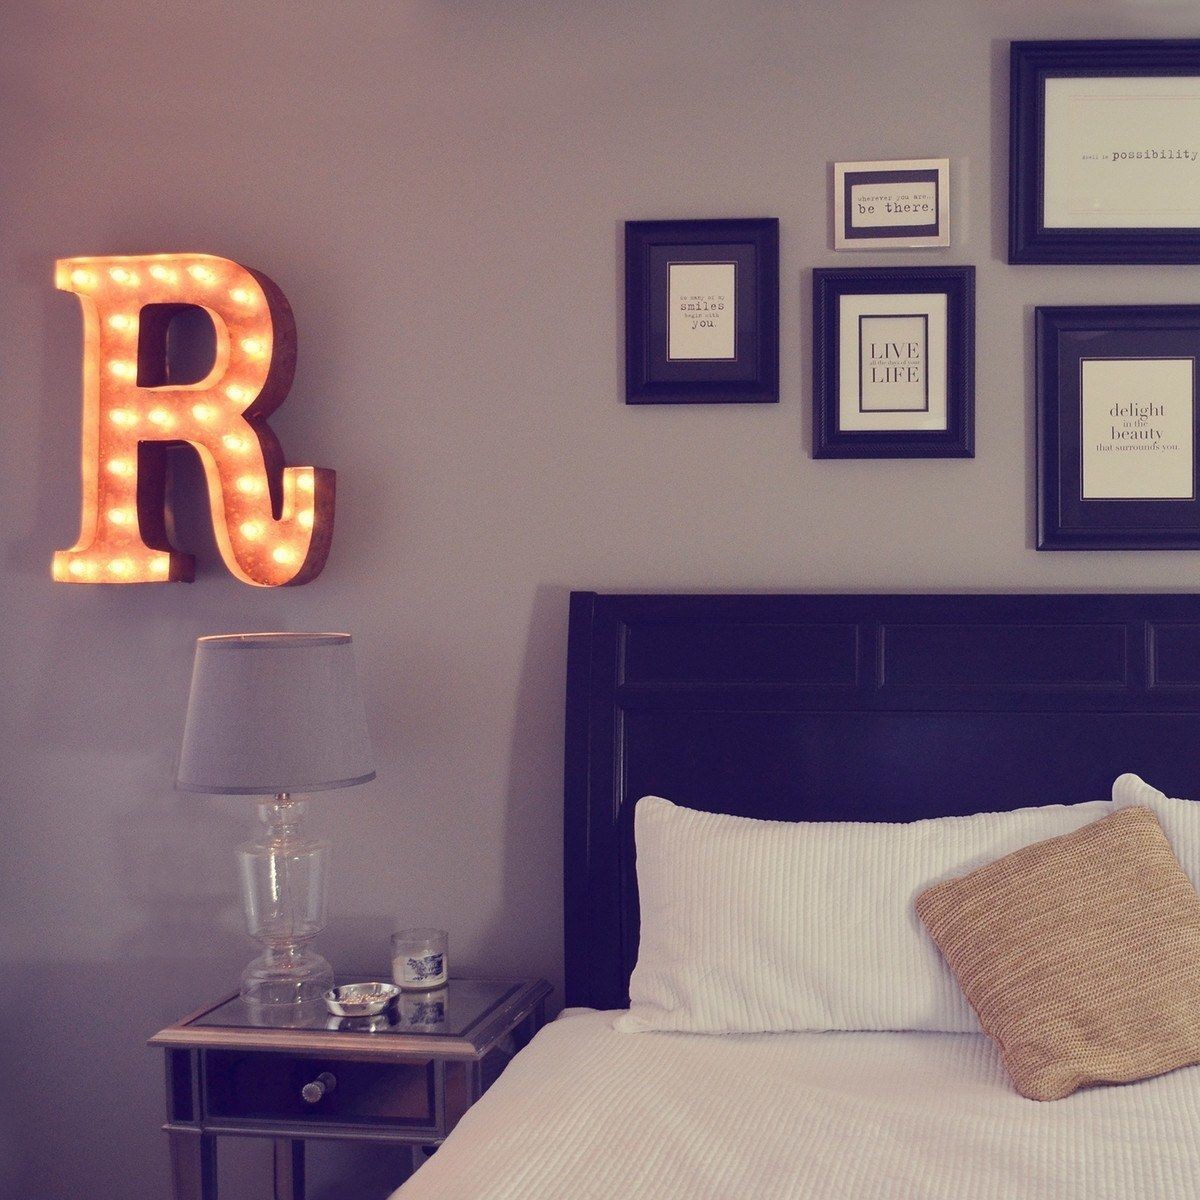 Shine brighter with our 24" R Vintage Marquee Letter Light Rustic Metal